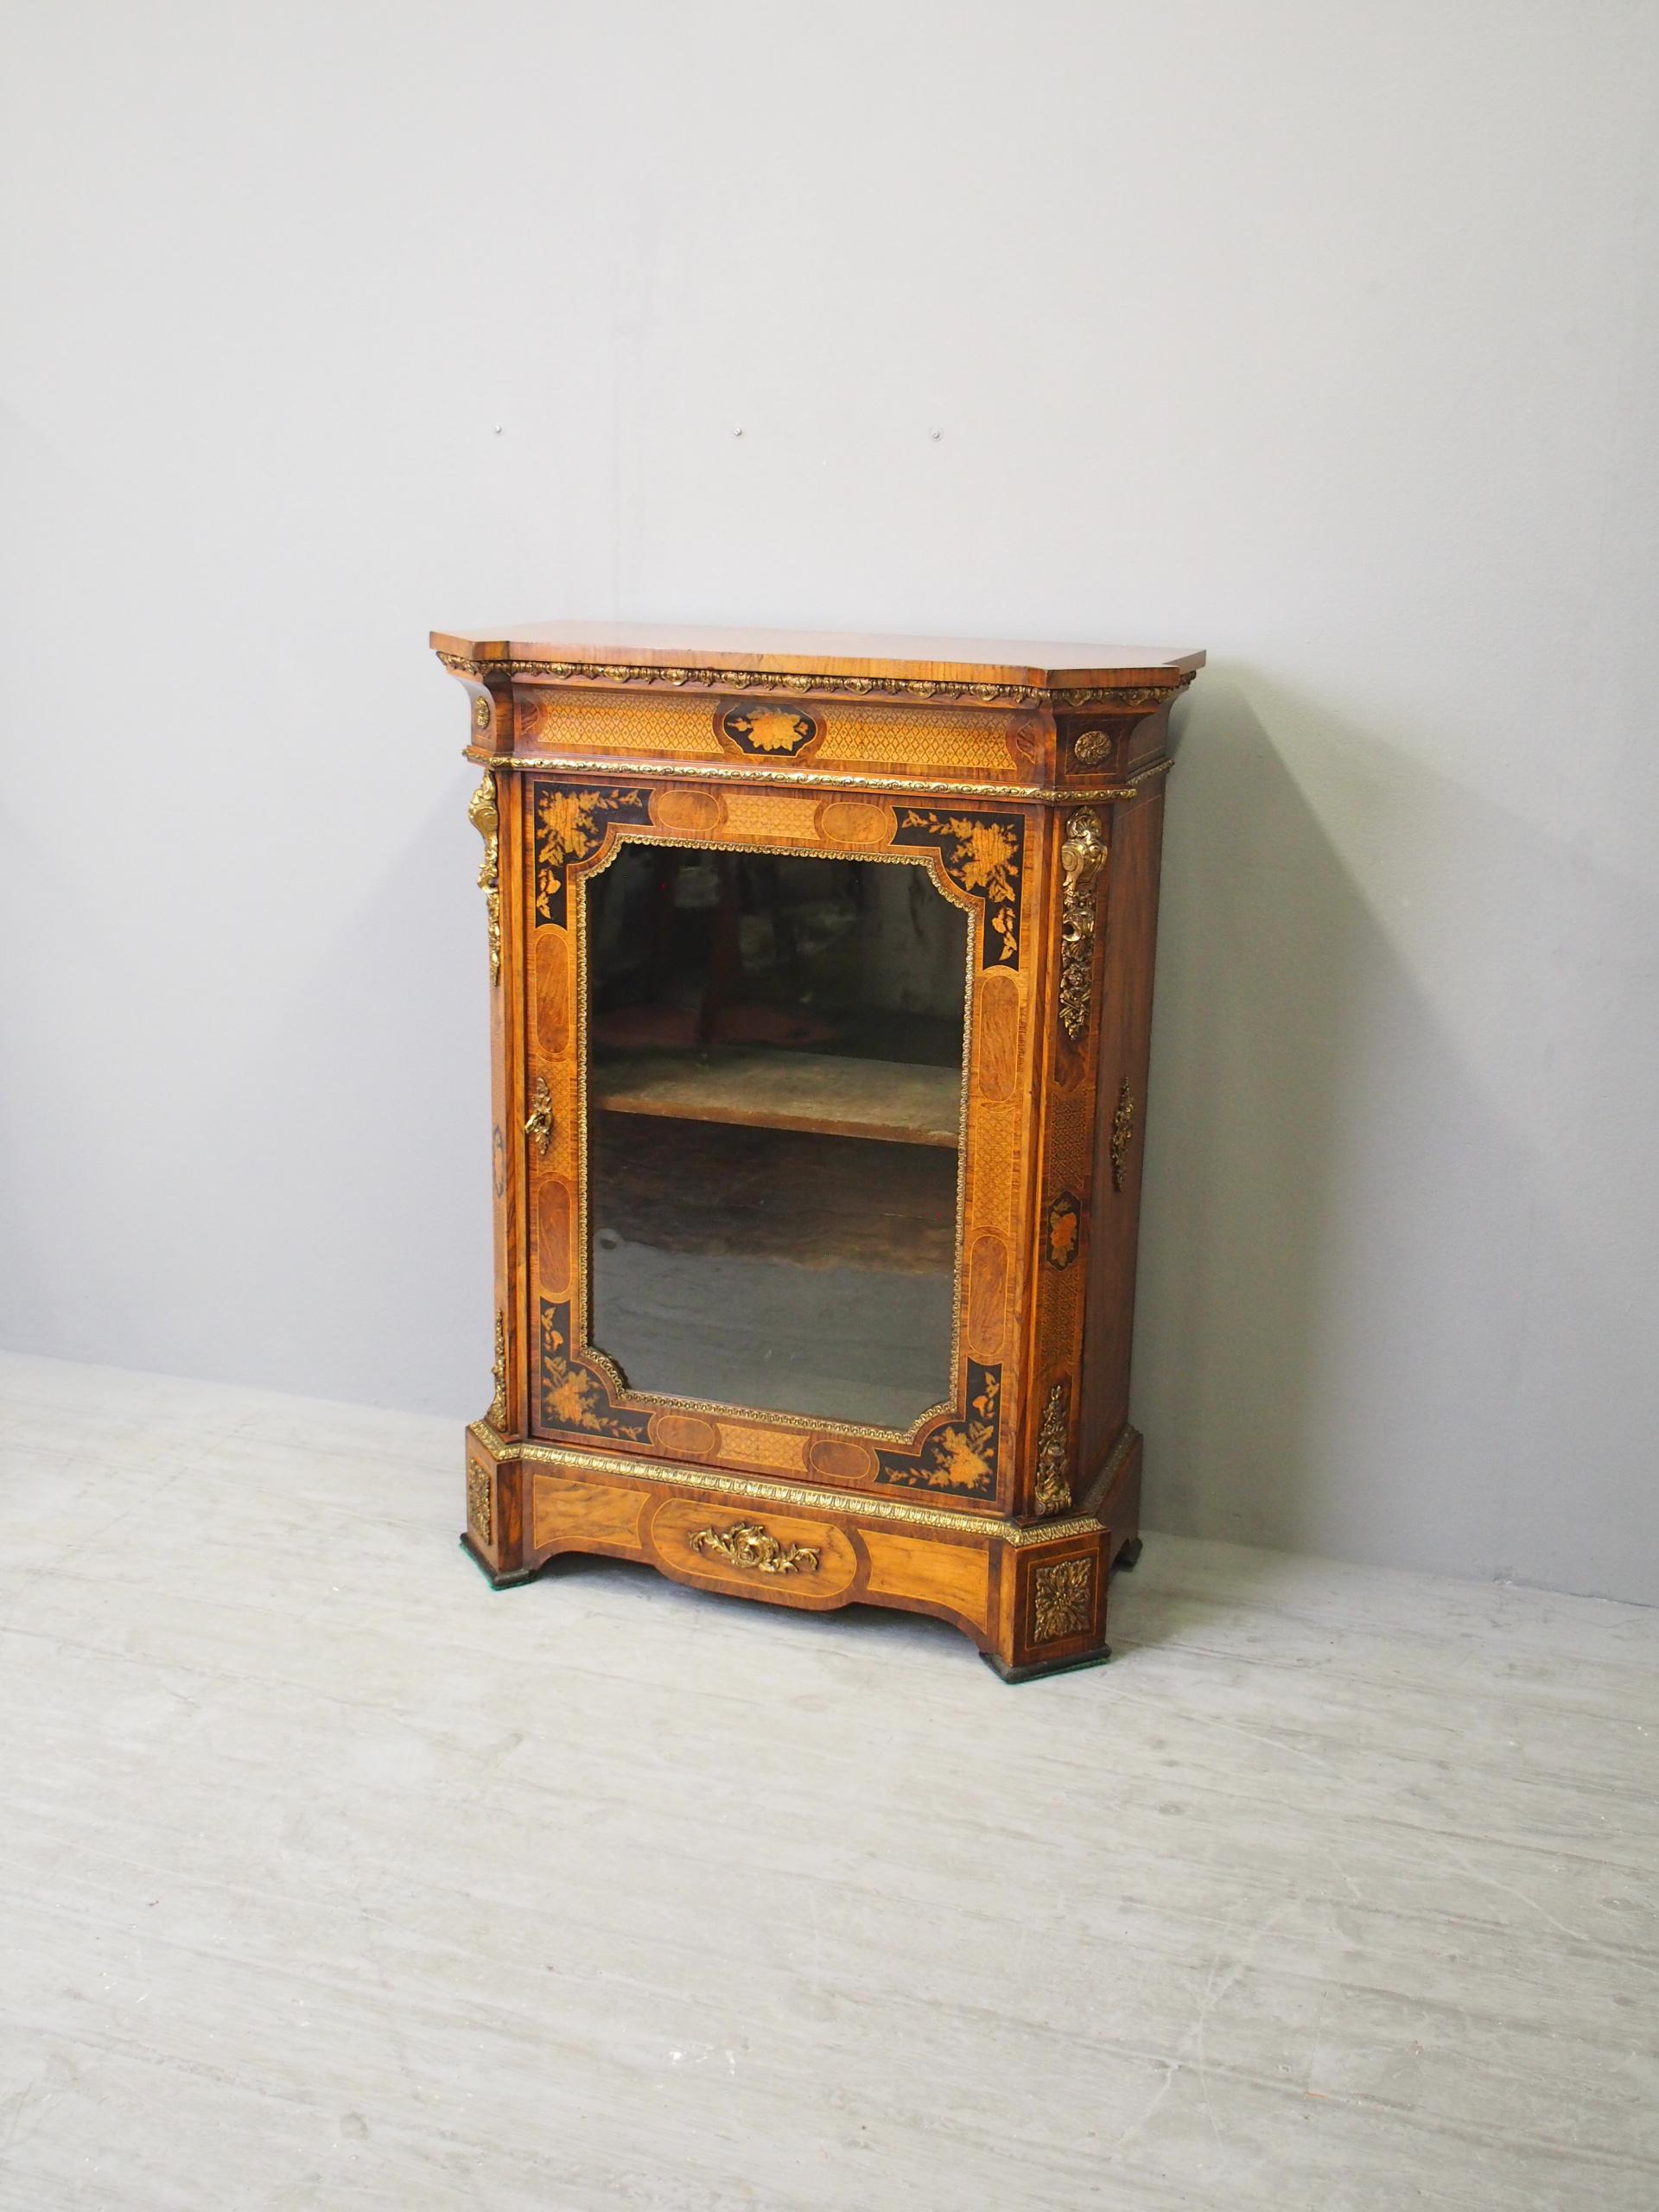 Mid Victorian figured walnut marquetry and parquetry inlaid pier cabinet, circa 1860. The top is in mirror-matched figured walnut with chamfered outset corners, over a frieze with extensive inlaid decoration and ormolu mounts. It has a shaped inlaid